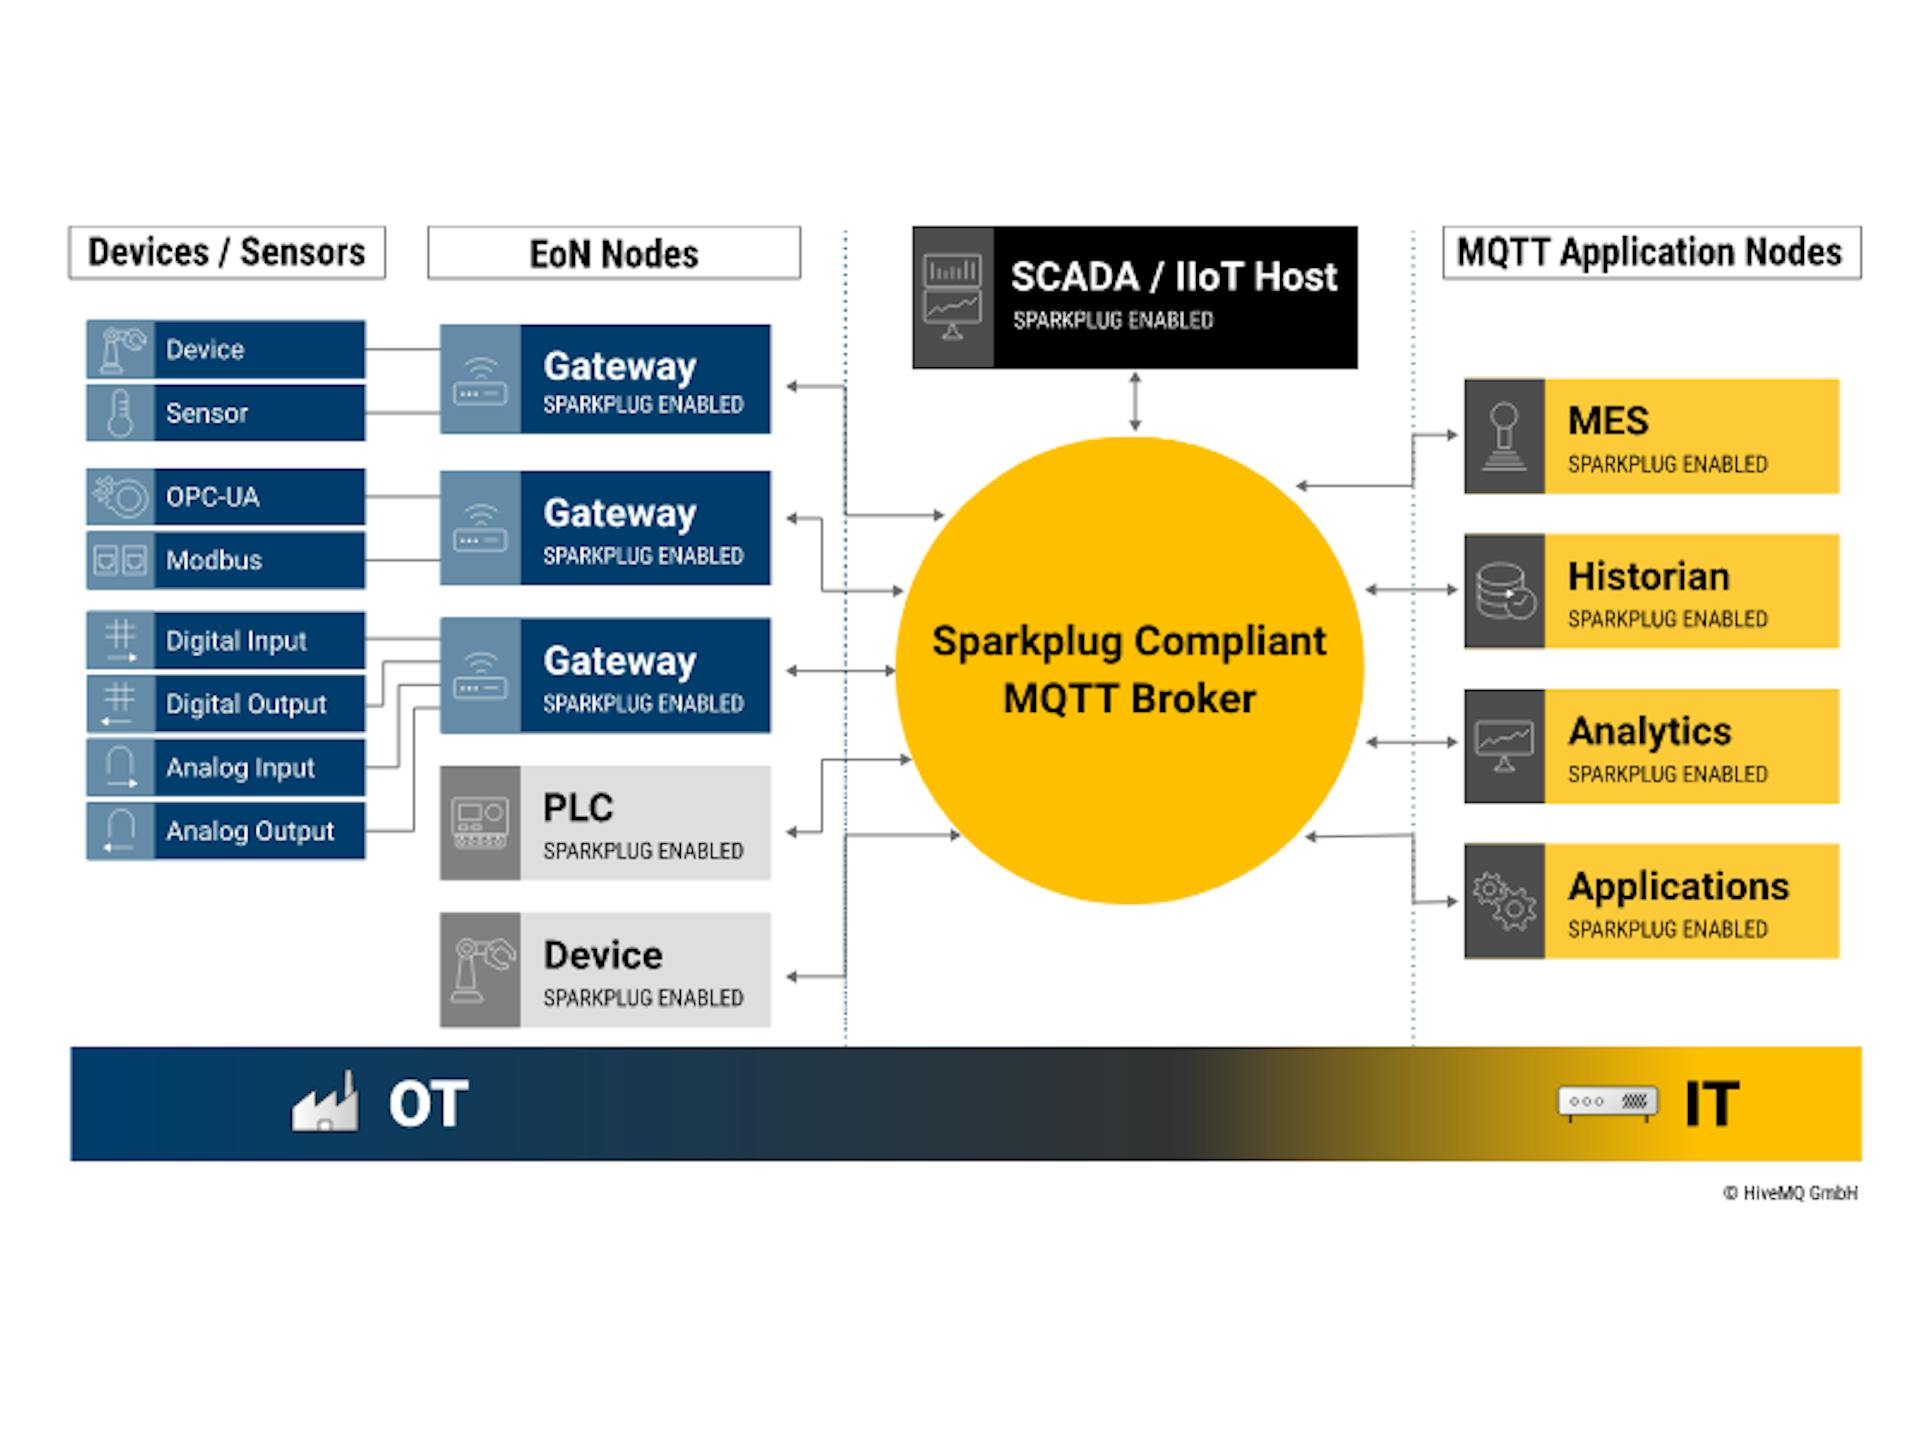 Figure 2: An MQTT Sparkplug-based architecture that supports multiple manufacturing data producers and data consumers to bridge OT to IT and enable downtime analytics